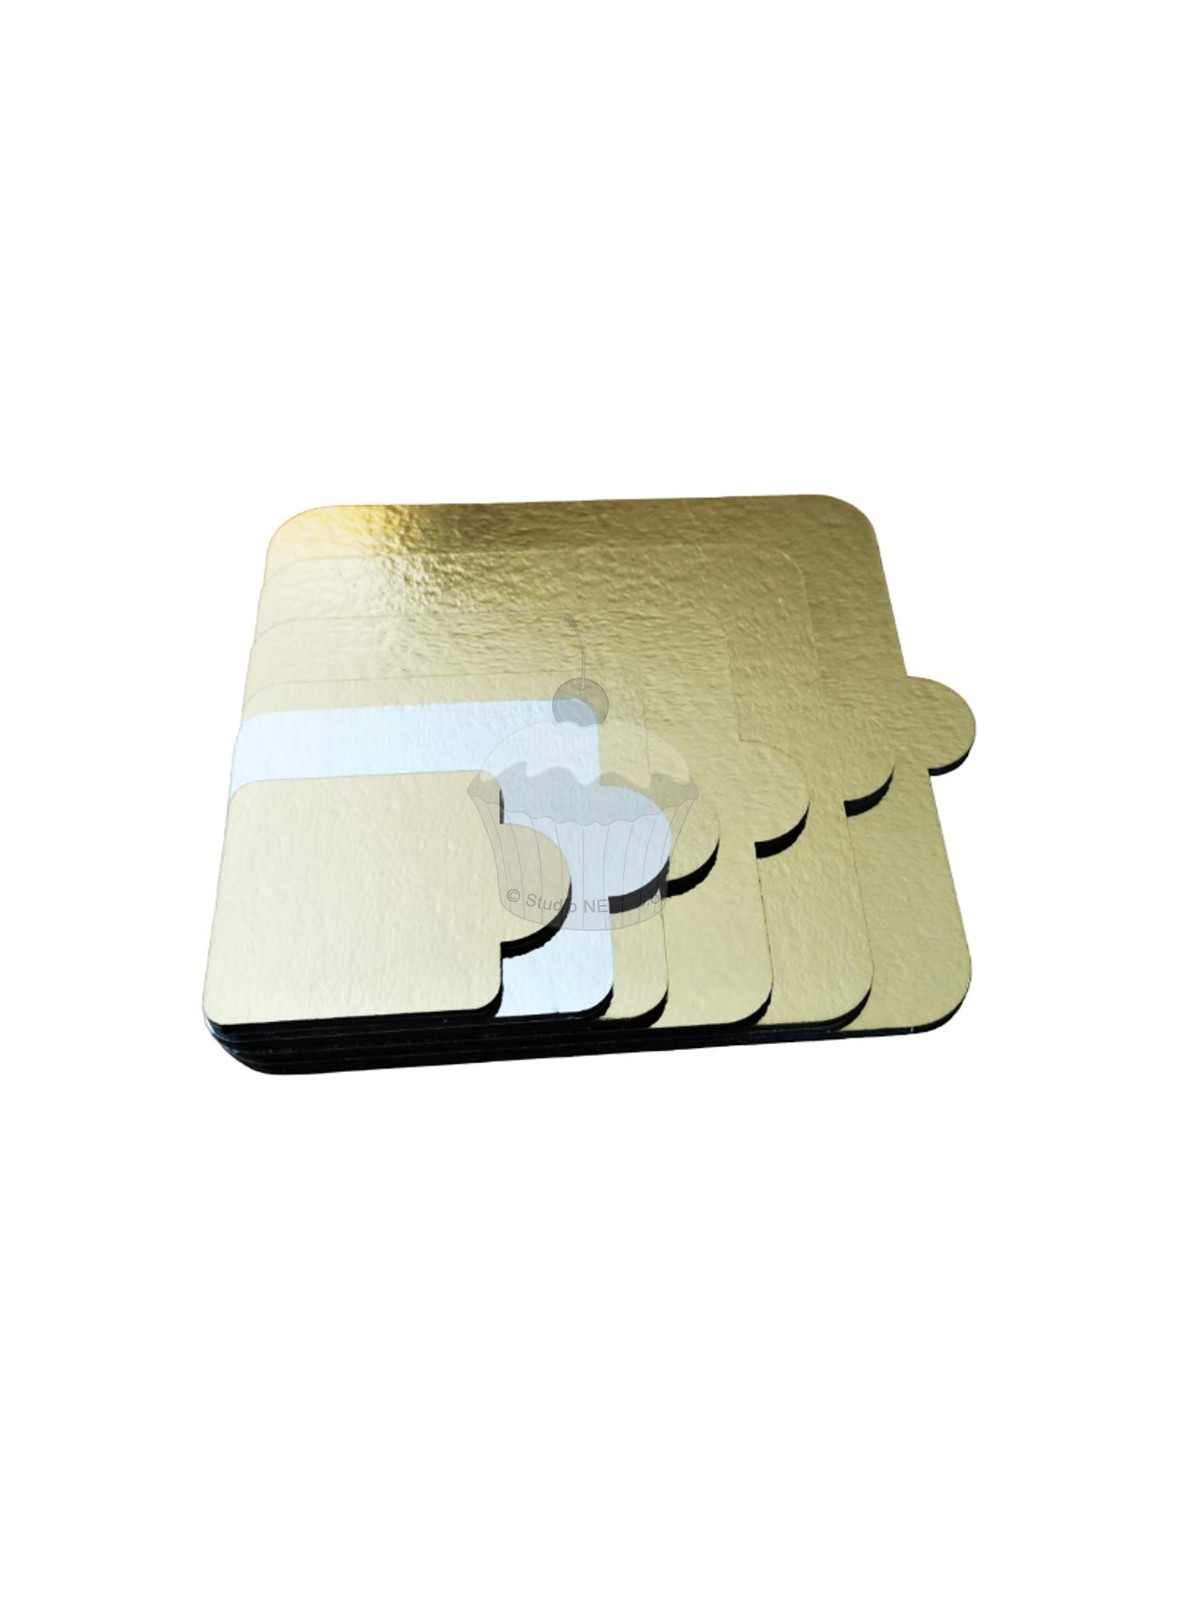 Square pad on monoportion gold / silver - 10 pcs